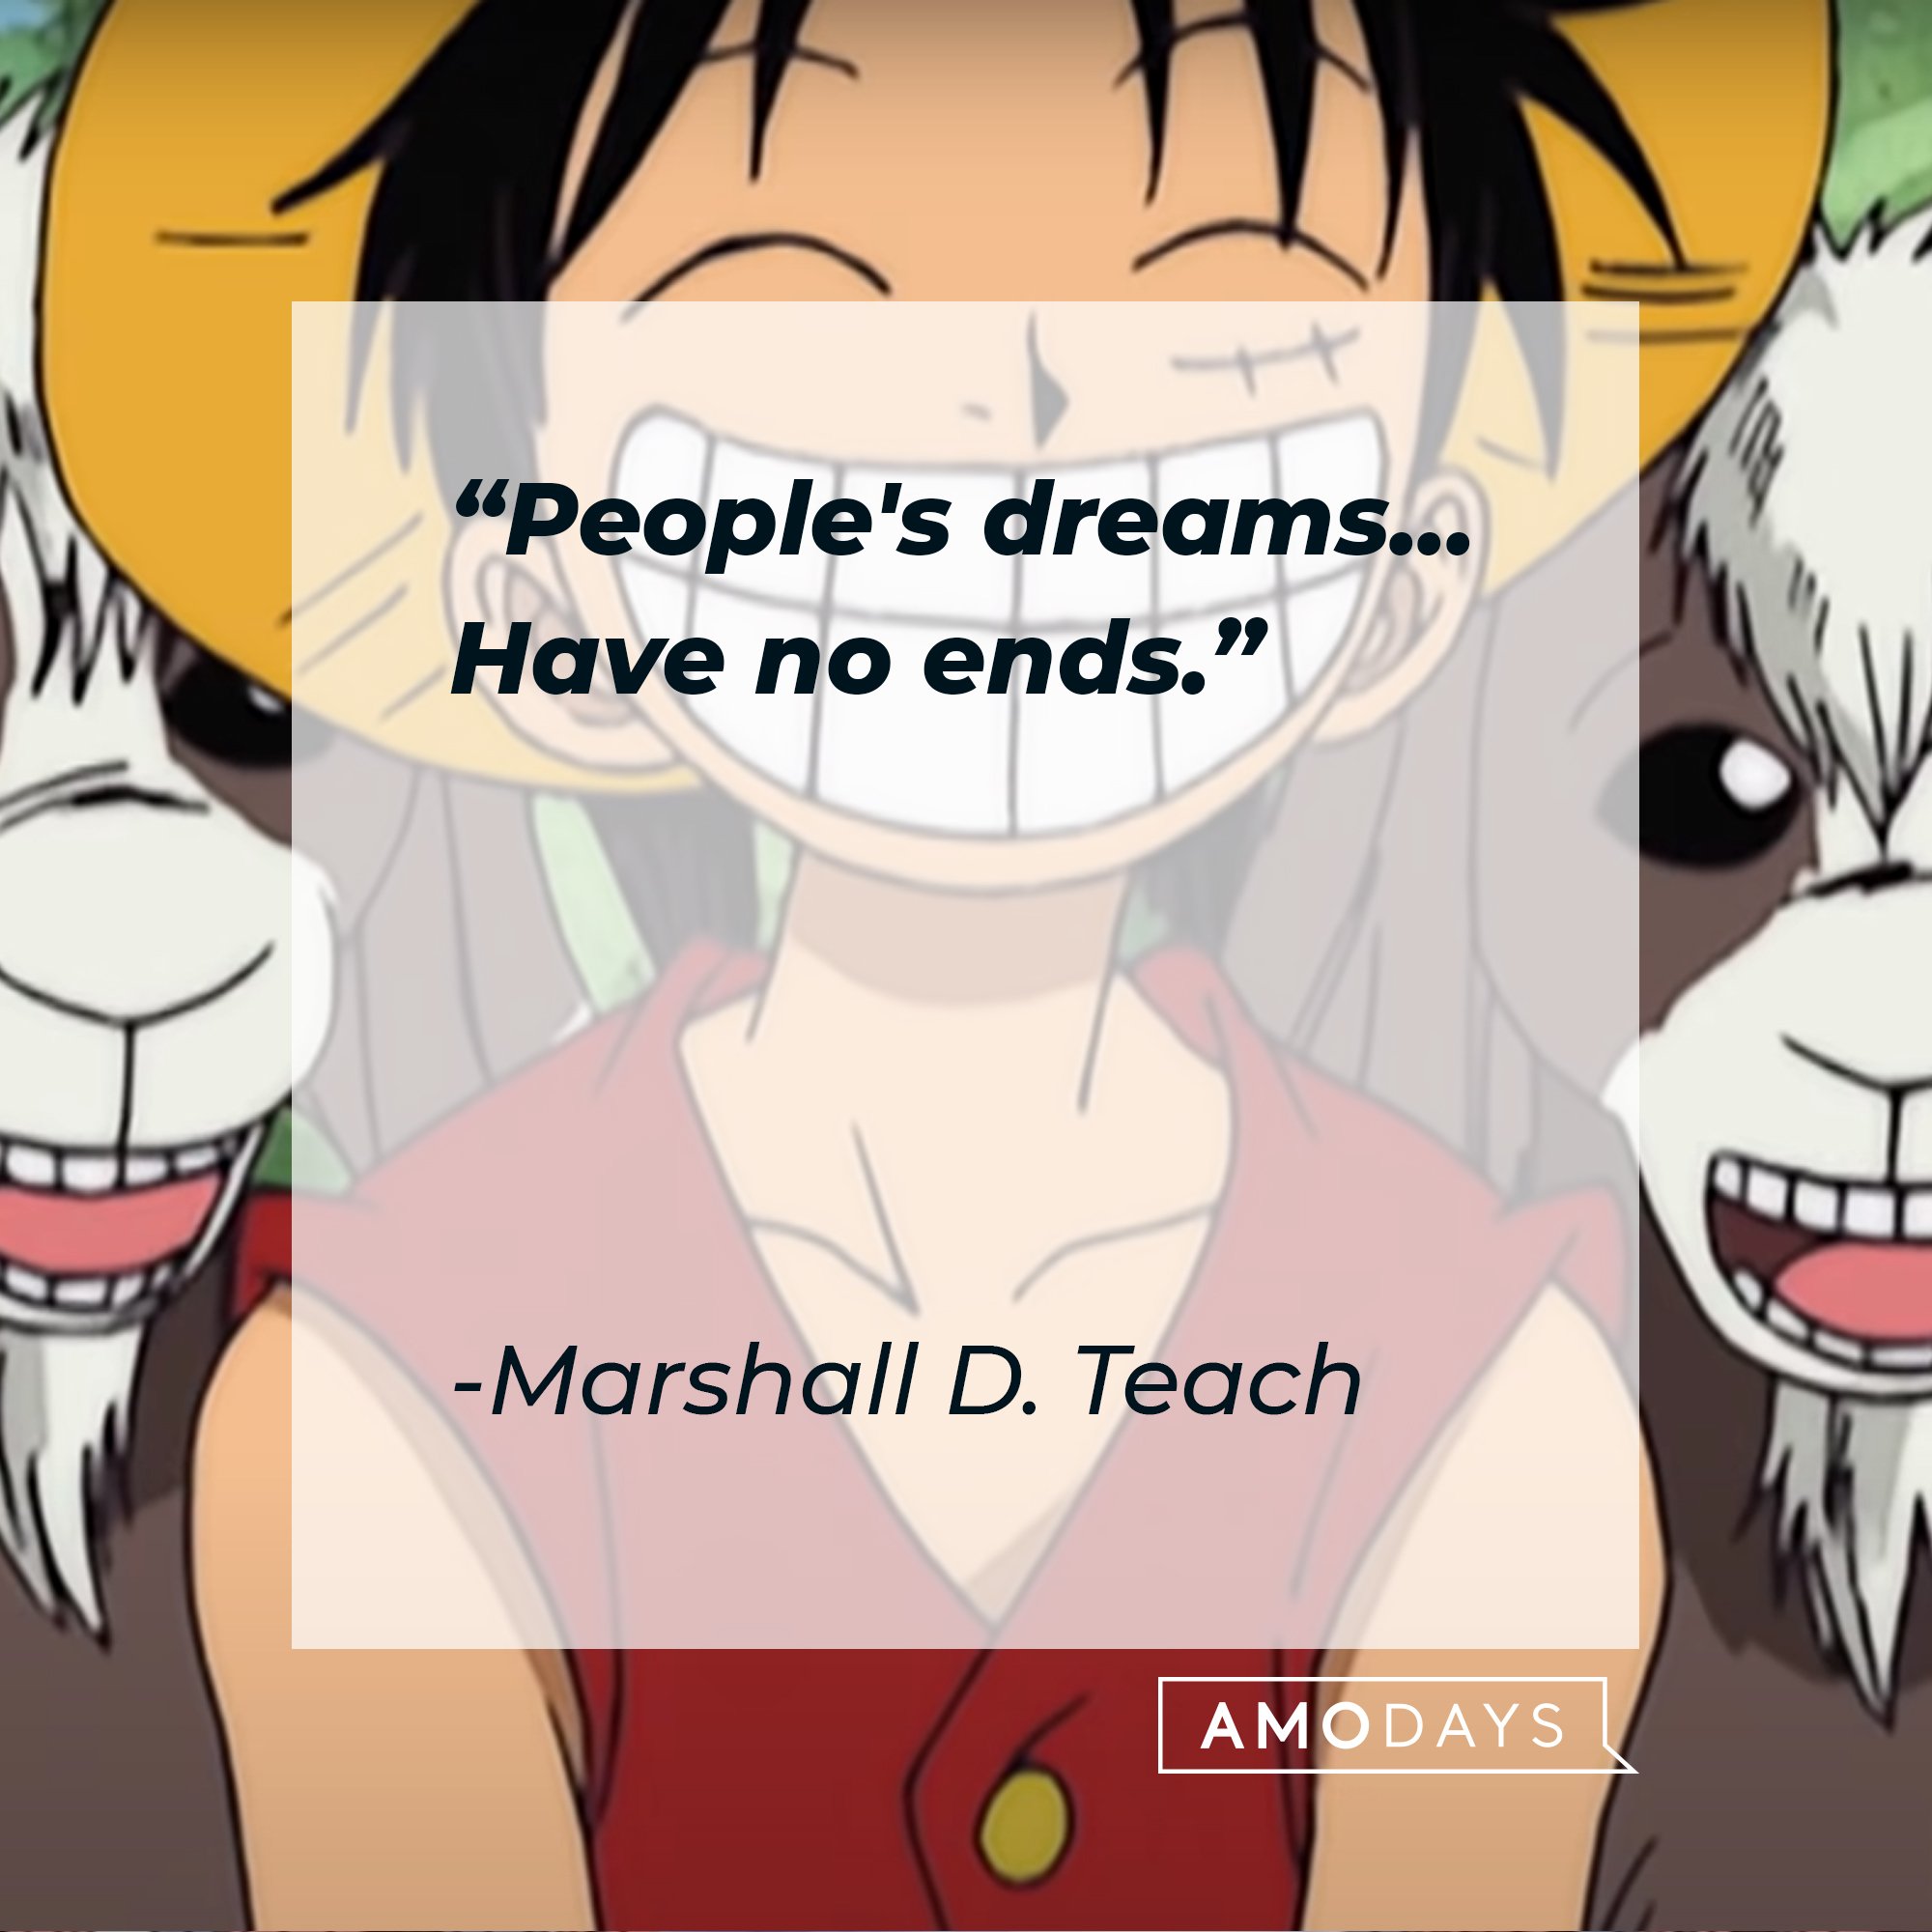 Marshall D. Teach’s quote: “People's dreams... Have no ends.”| Image: AmoDays